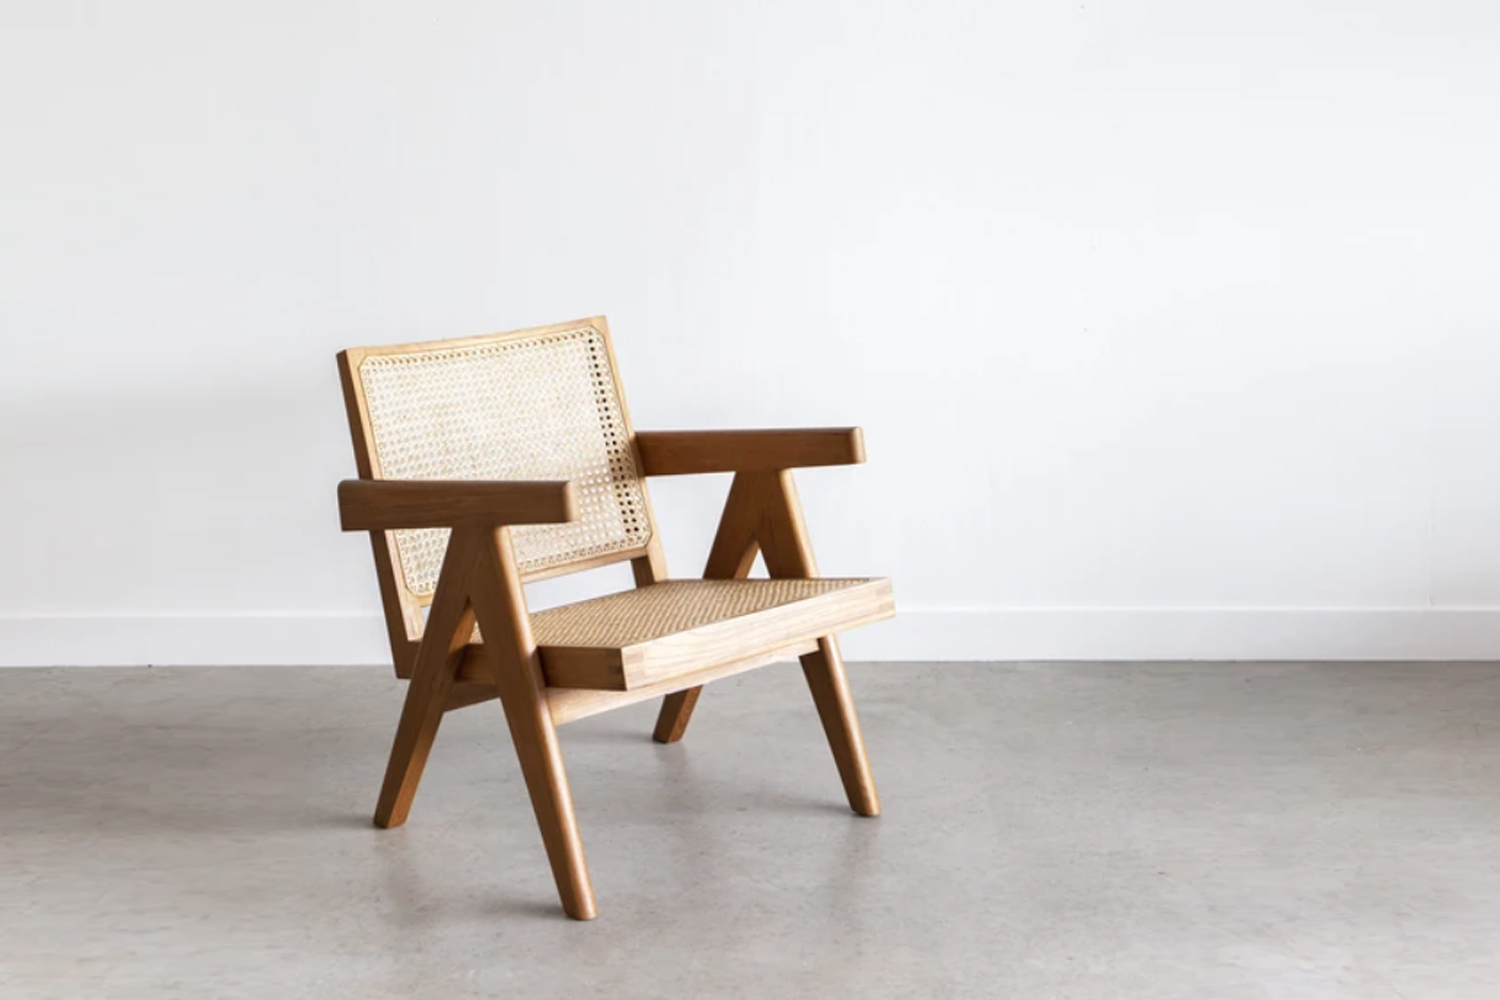 The Pierre Jeanneret re-edition Easy Armchair is available through Tigmi Trading.